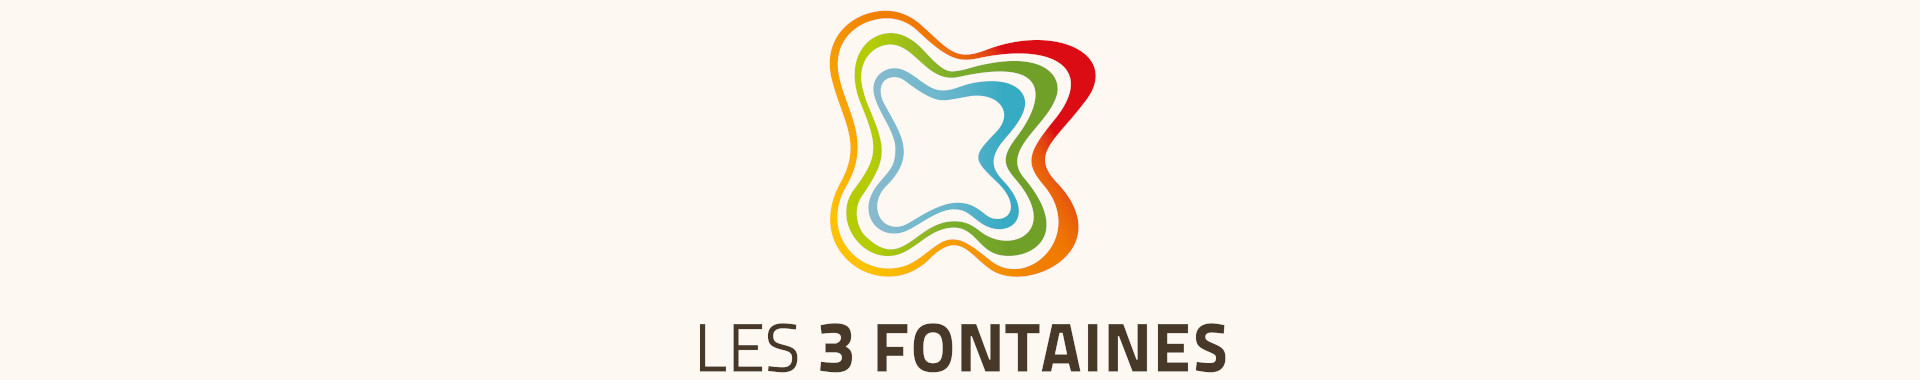 logo 3 fontaines